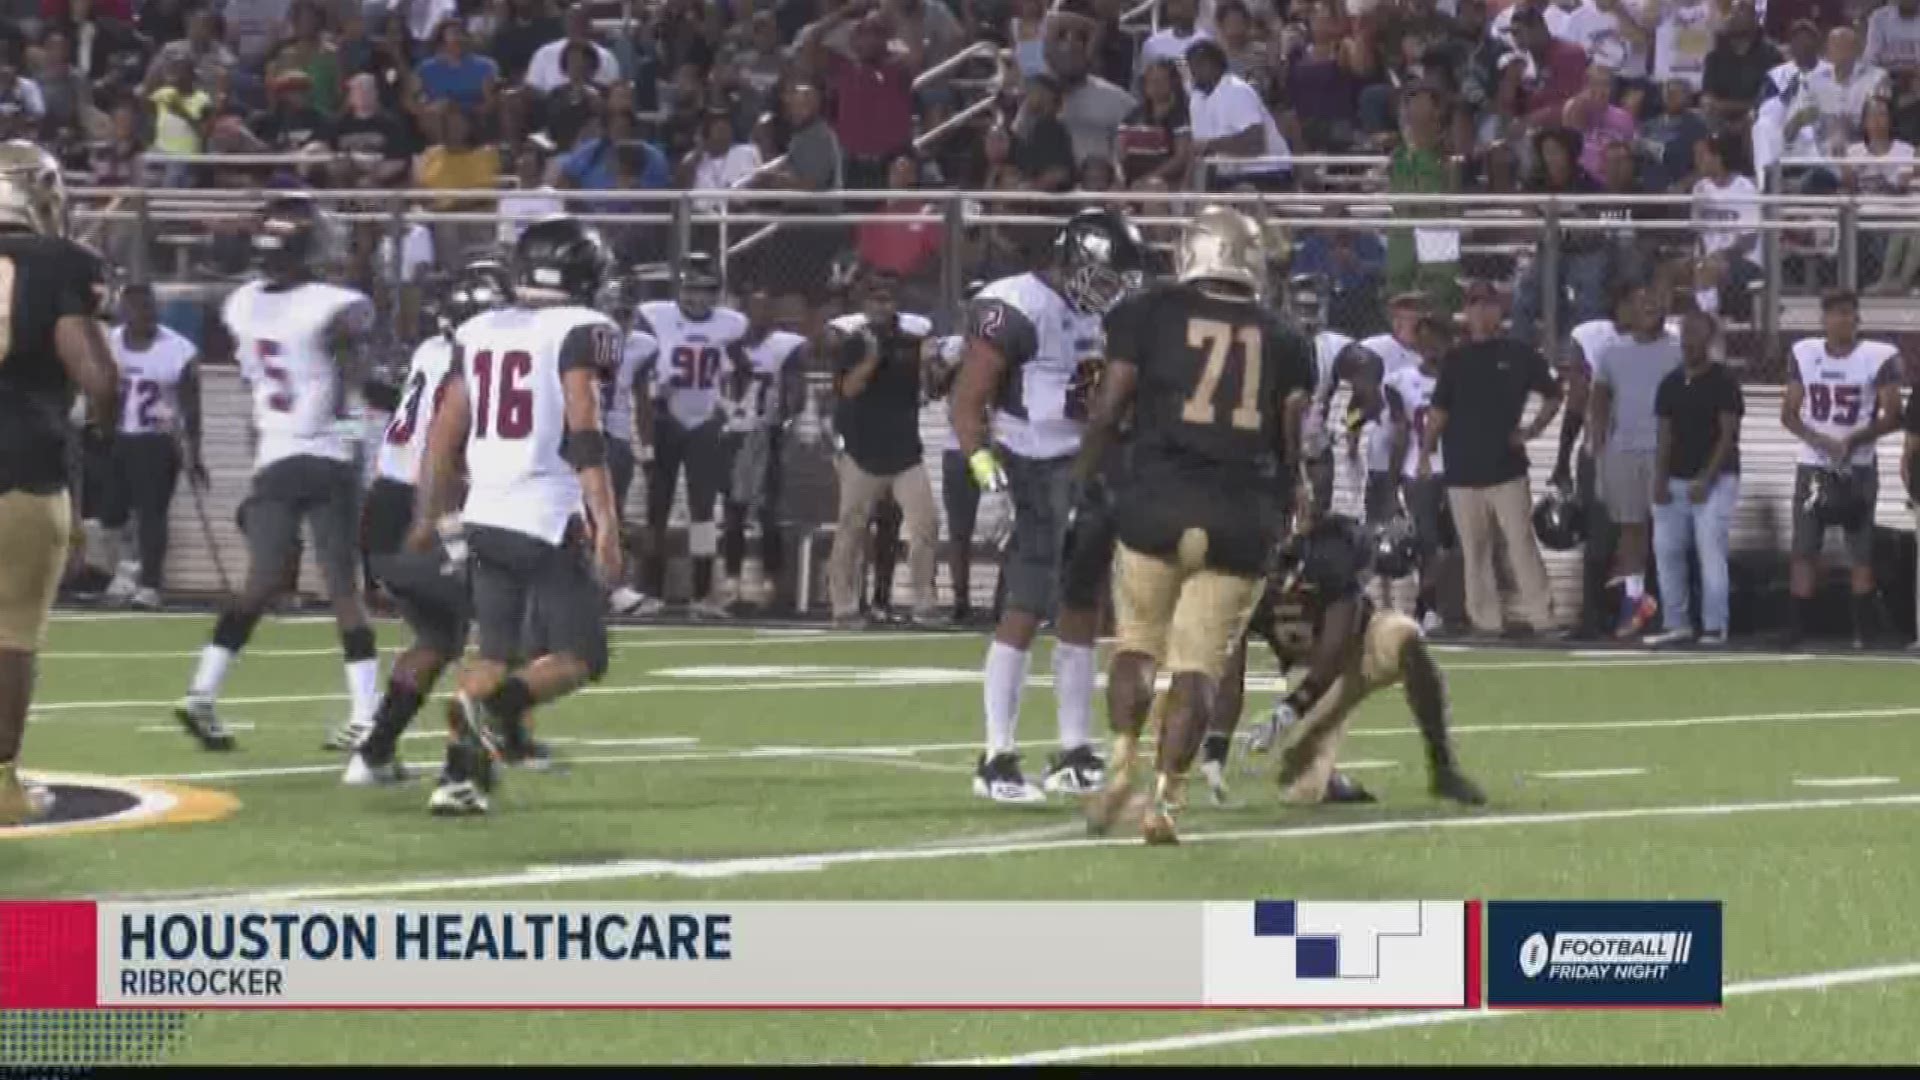 Here are your highlights from Football Friday Night on September 13.